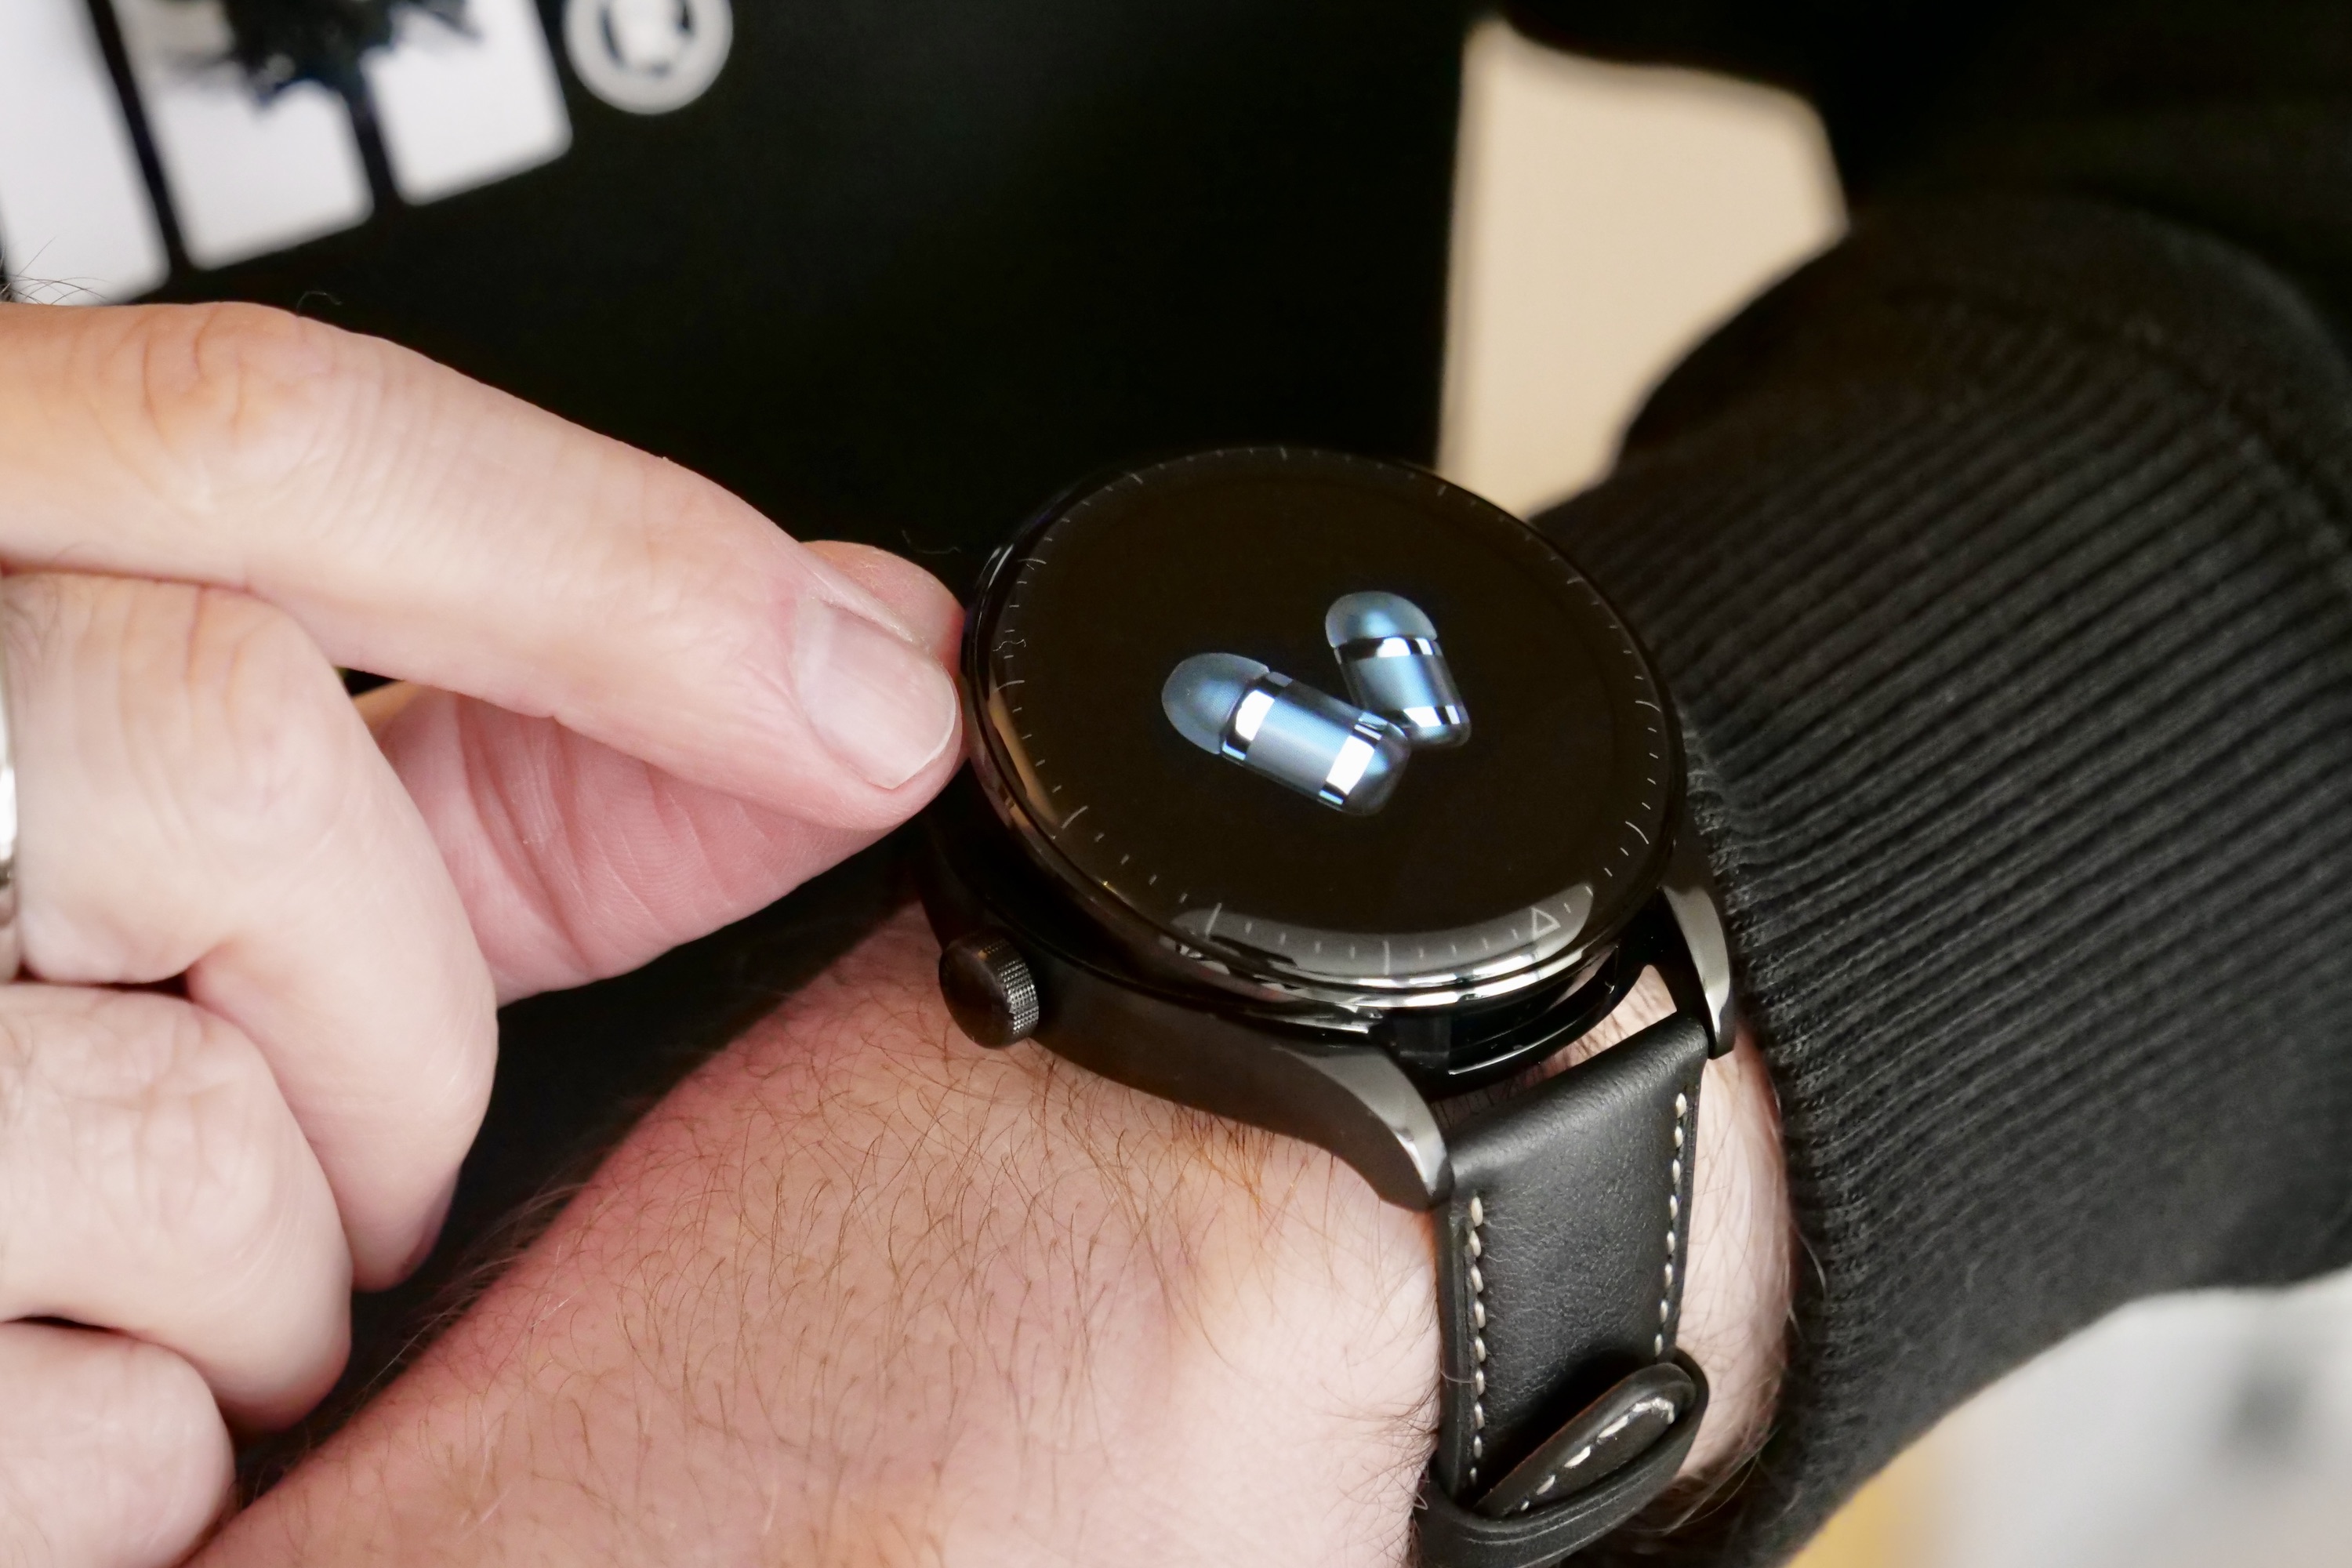 Huawei Watch 3 hands-on: A solid smartwatch with far-reaching implications  - CNET